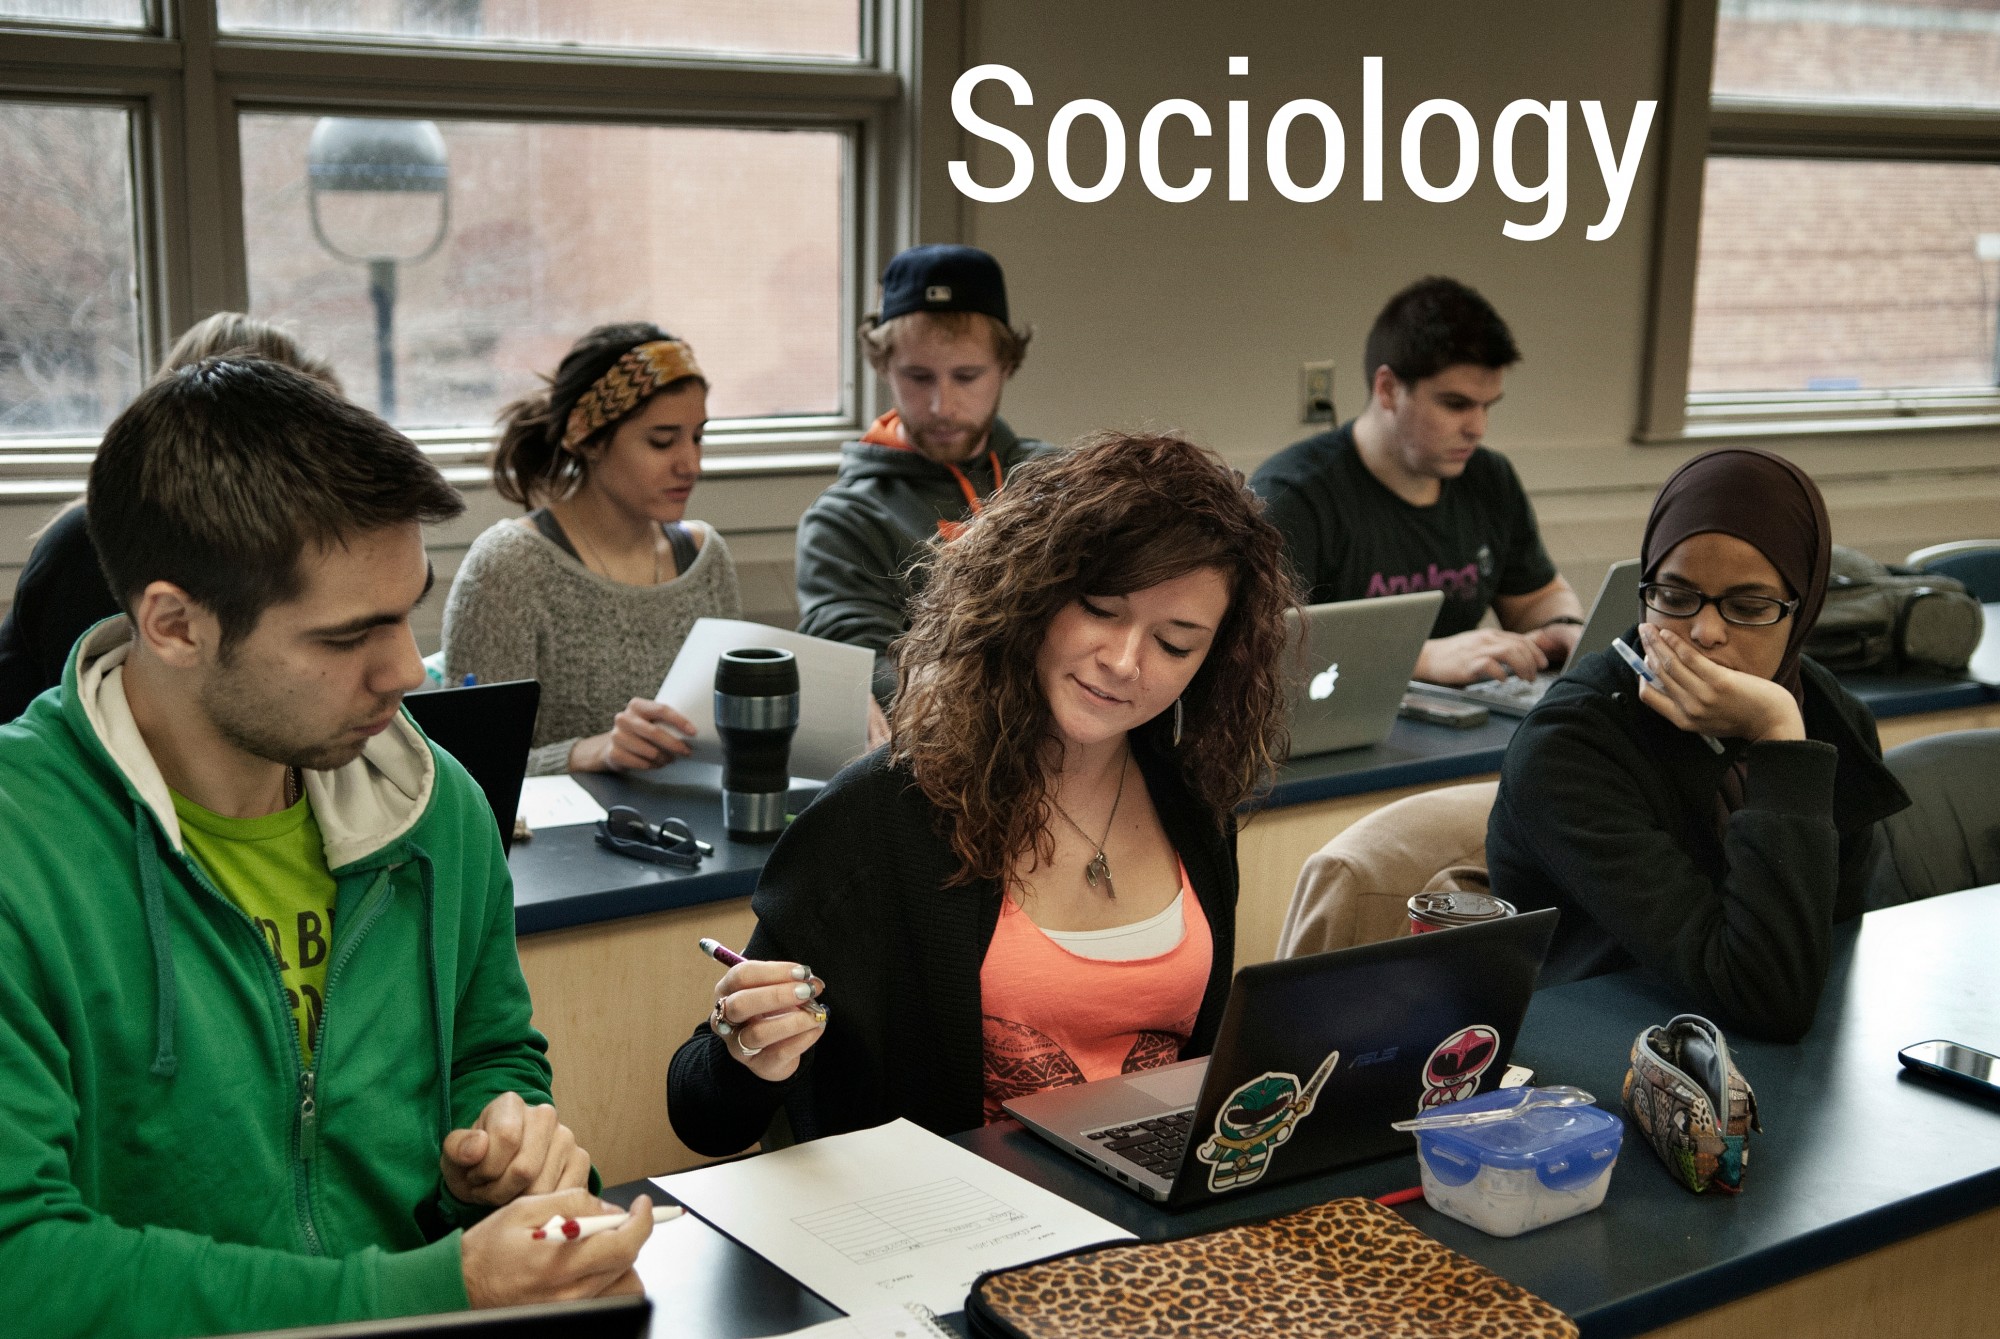 Sociology students in a classroom with Sociology text super-imposed